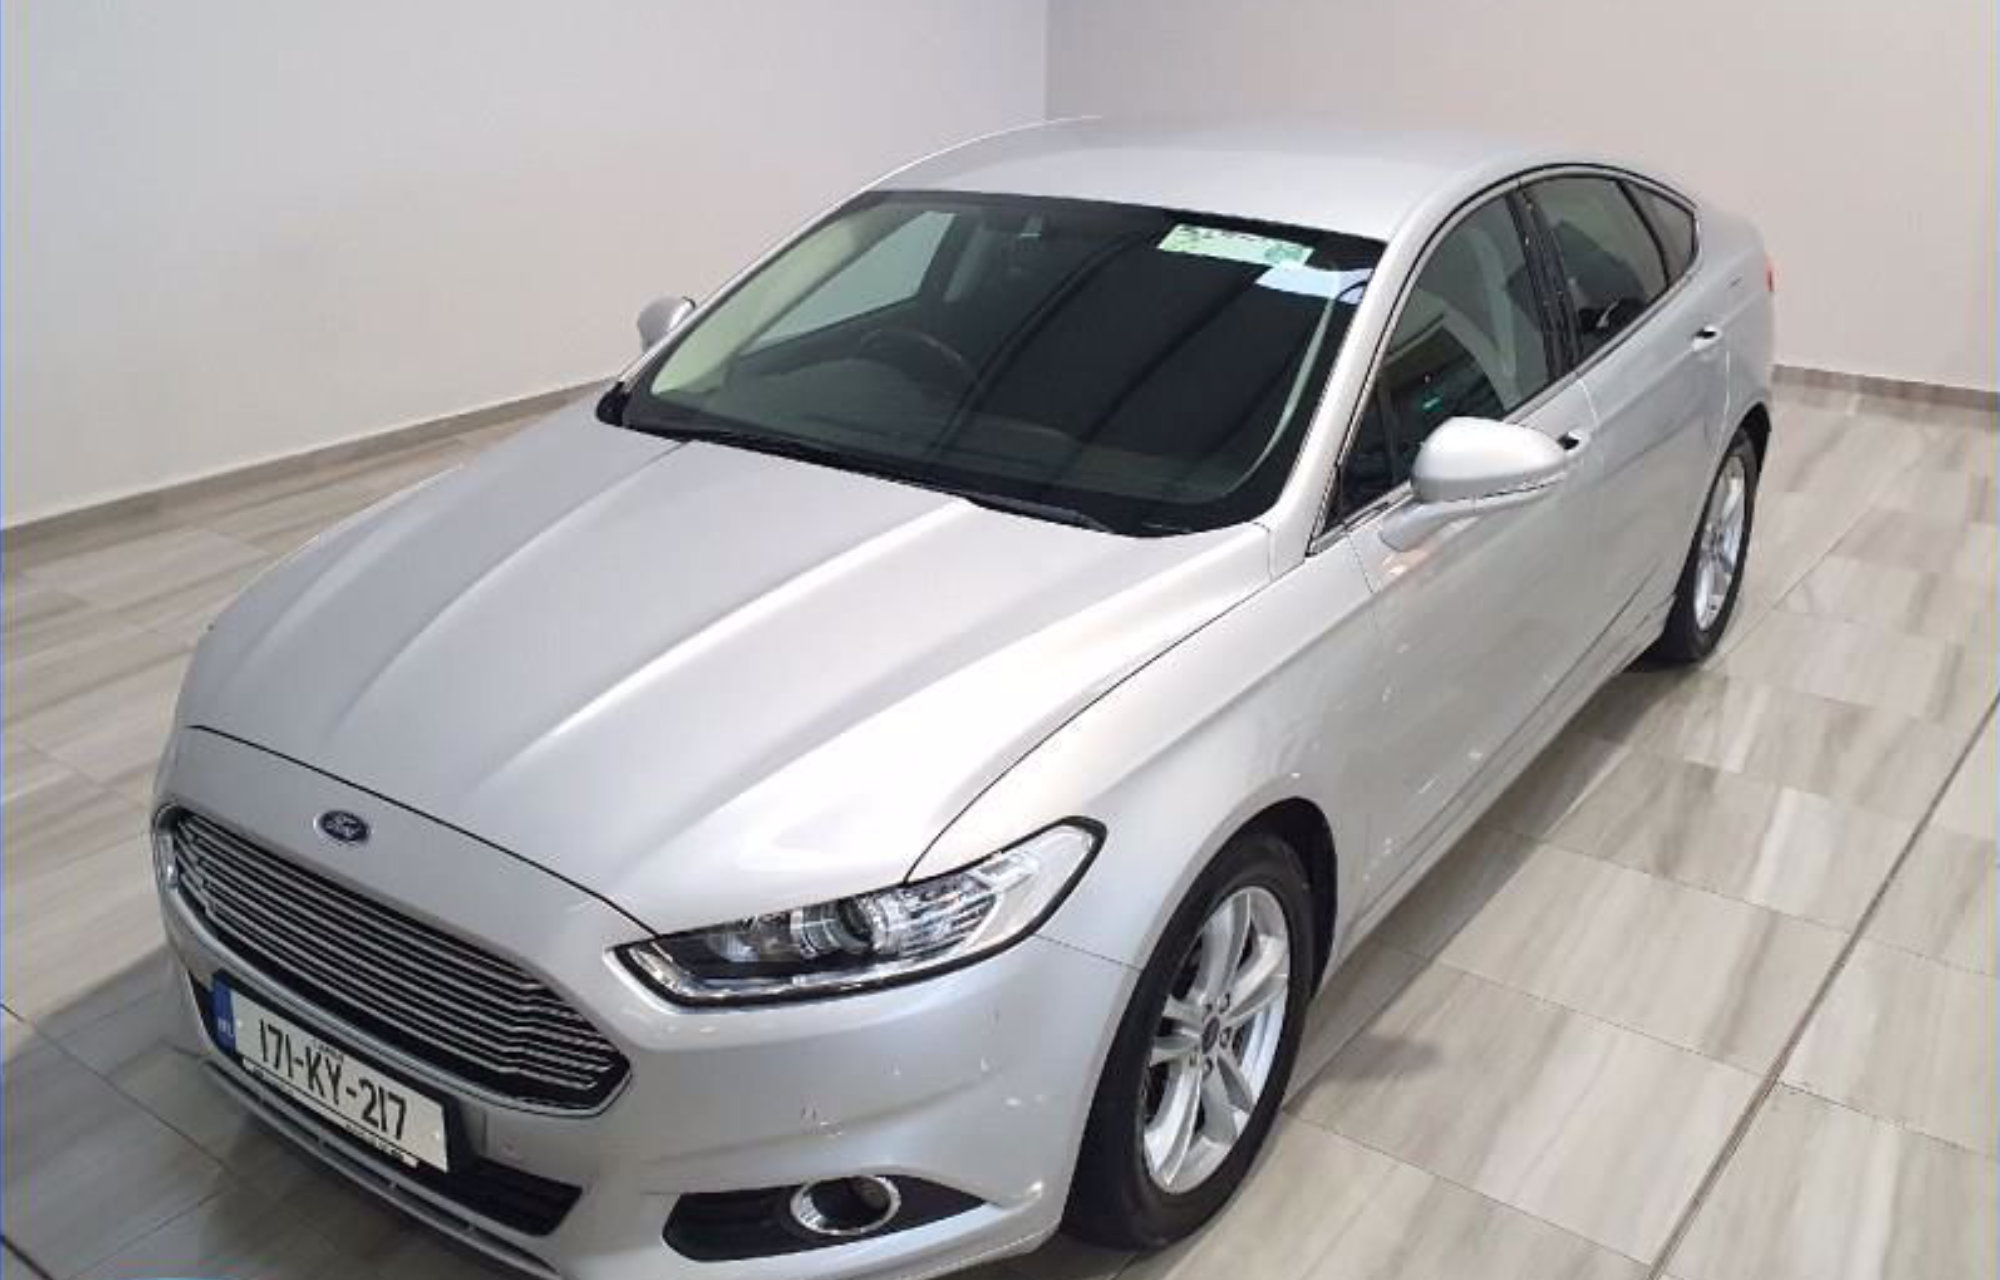 Ford Mondeo front